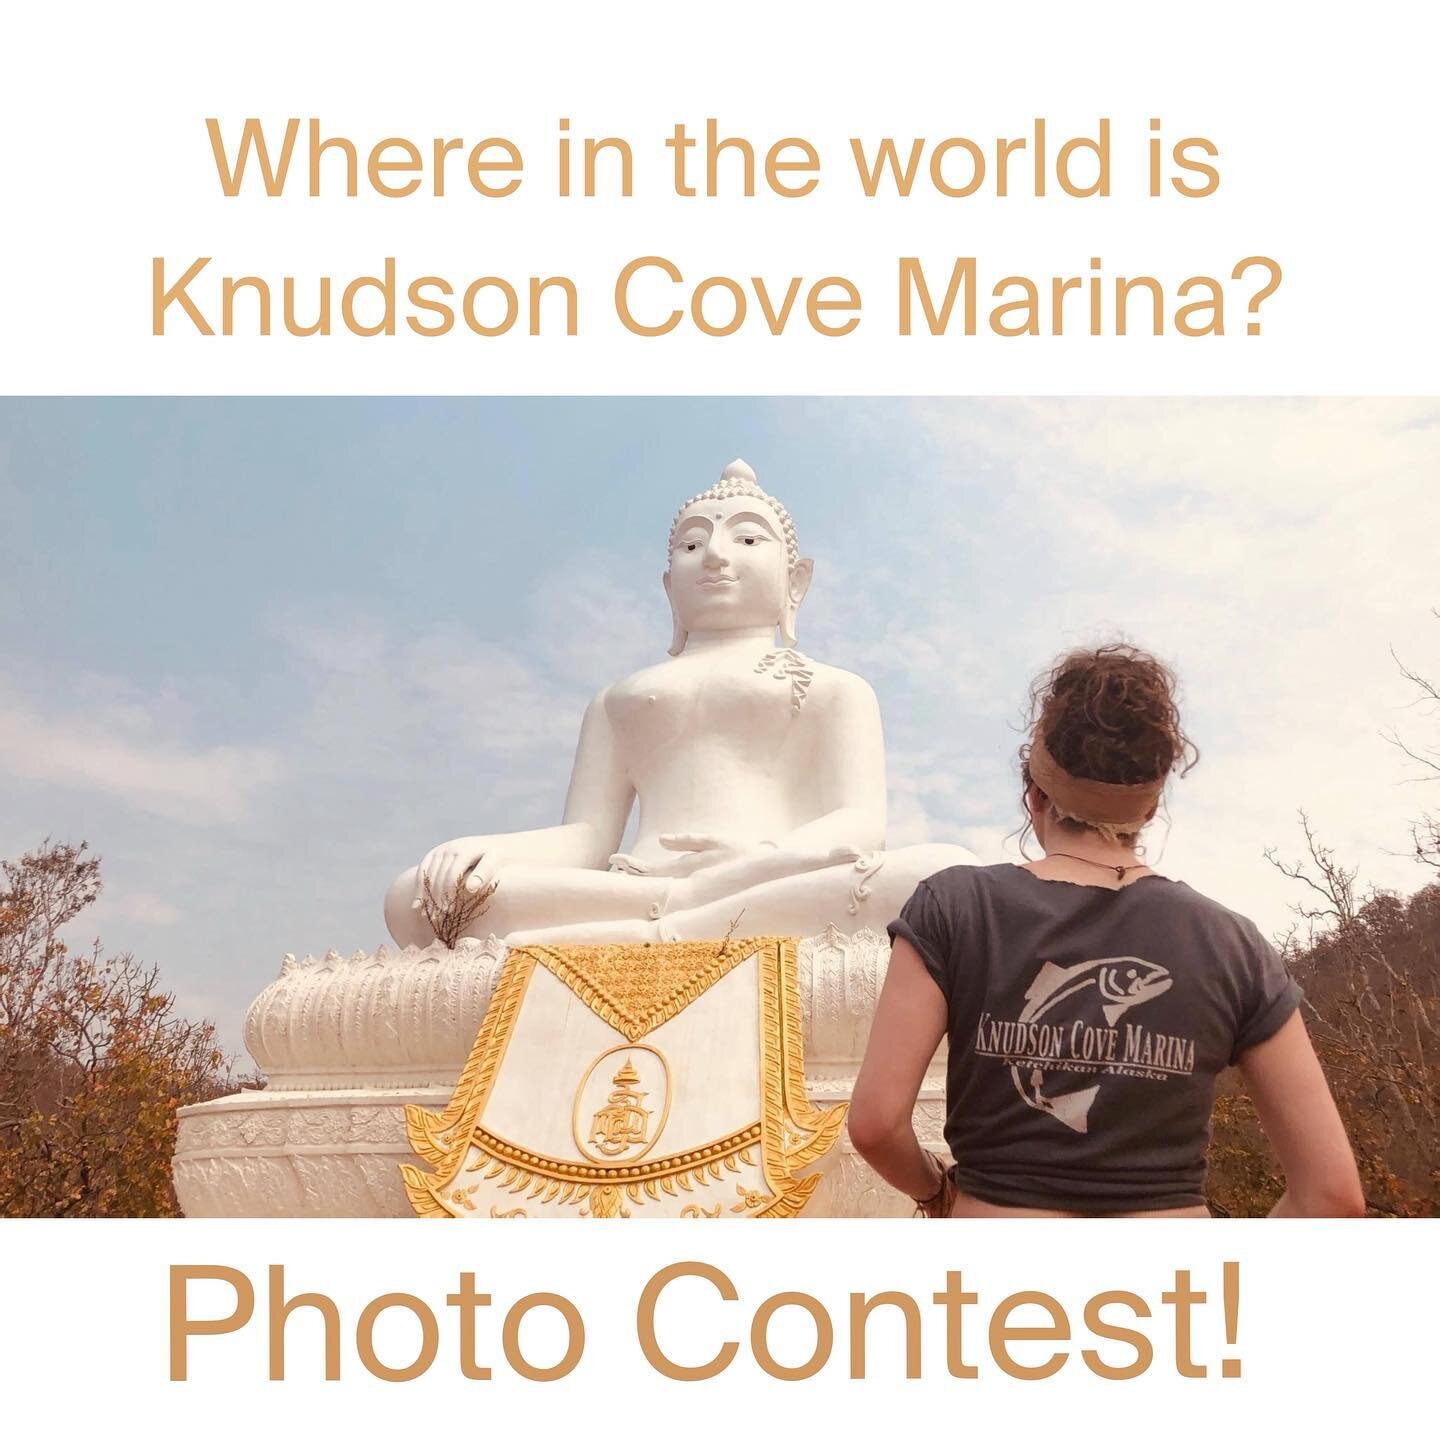 Lets start up an old favorite.... the &quot;Where in the world is Knudson Cove Marina?!&quot; photo contest!

The best photo can WIN a new Knudson Cove Marina hoodie of their choosing! 

1. We are looking for pictures of people wearing KCM gear. 
2. 